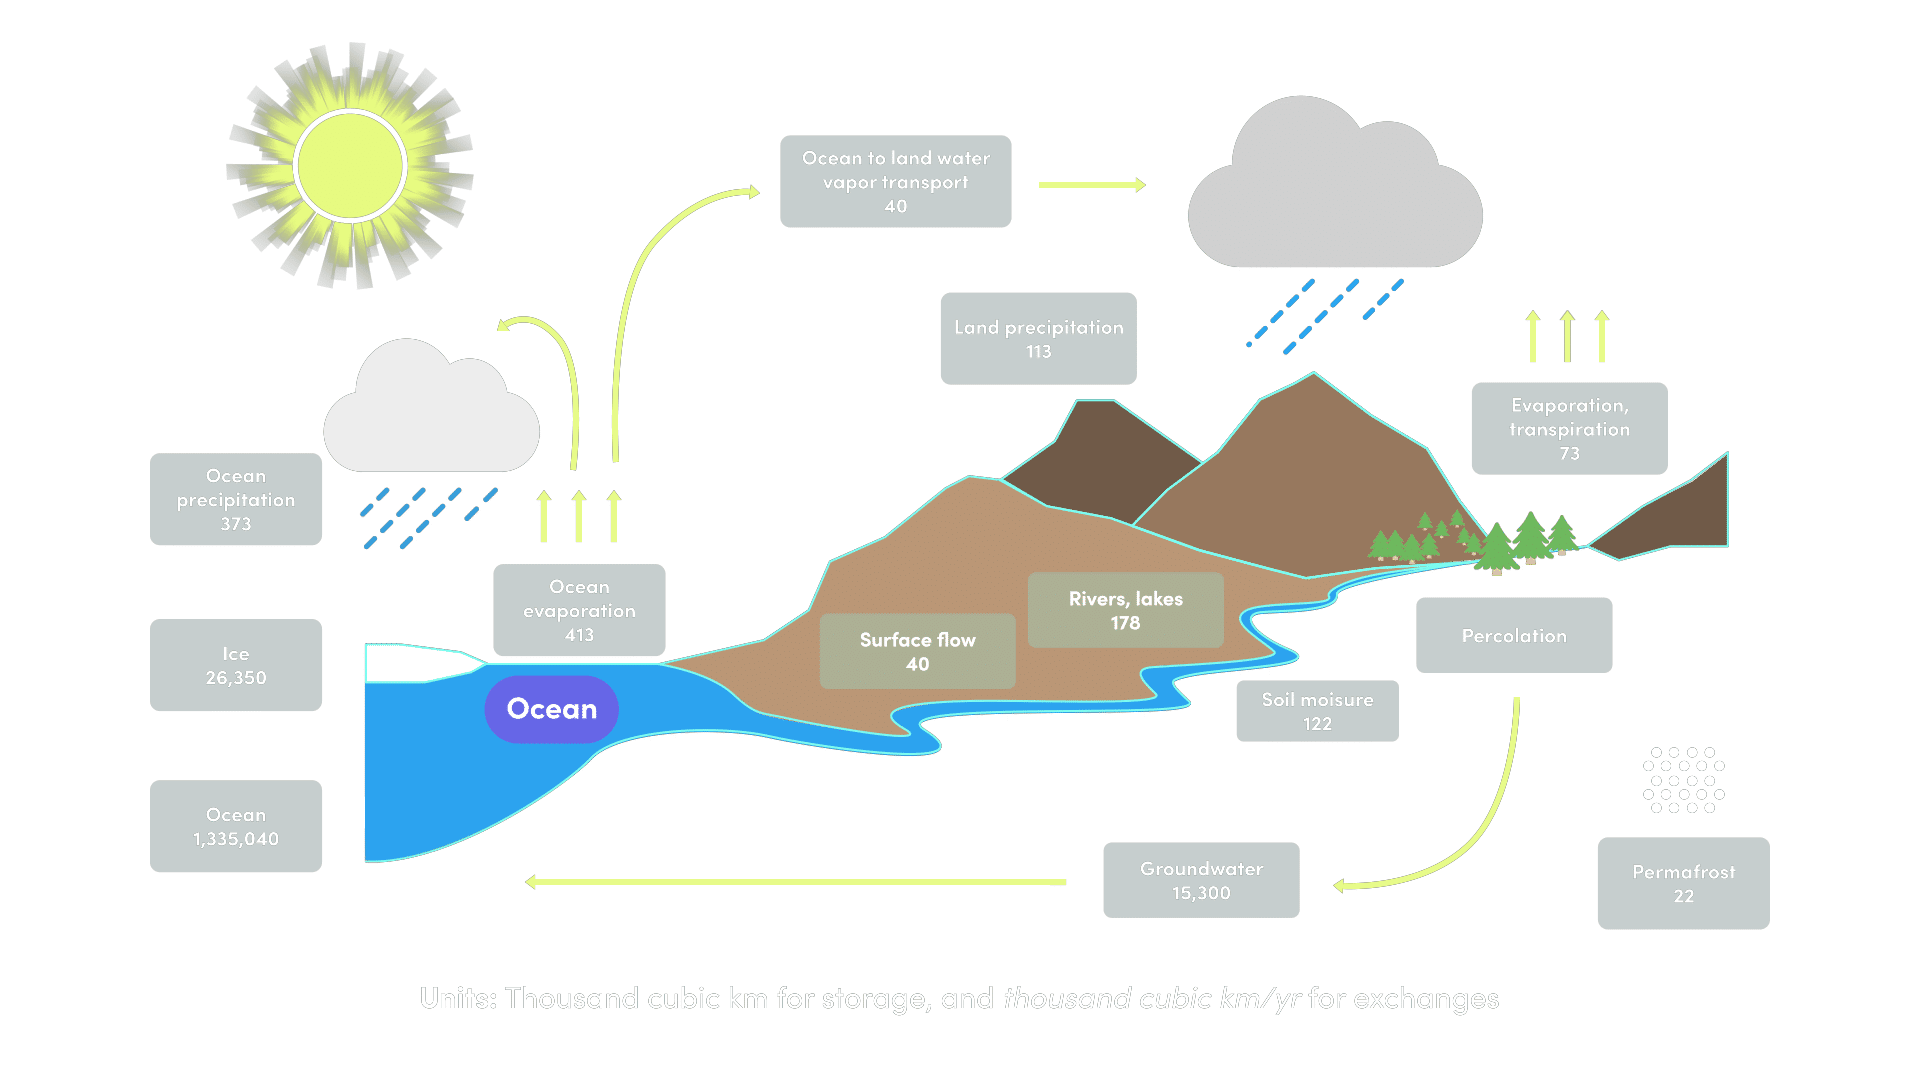 The Earth's hydrological cycle